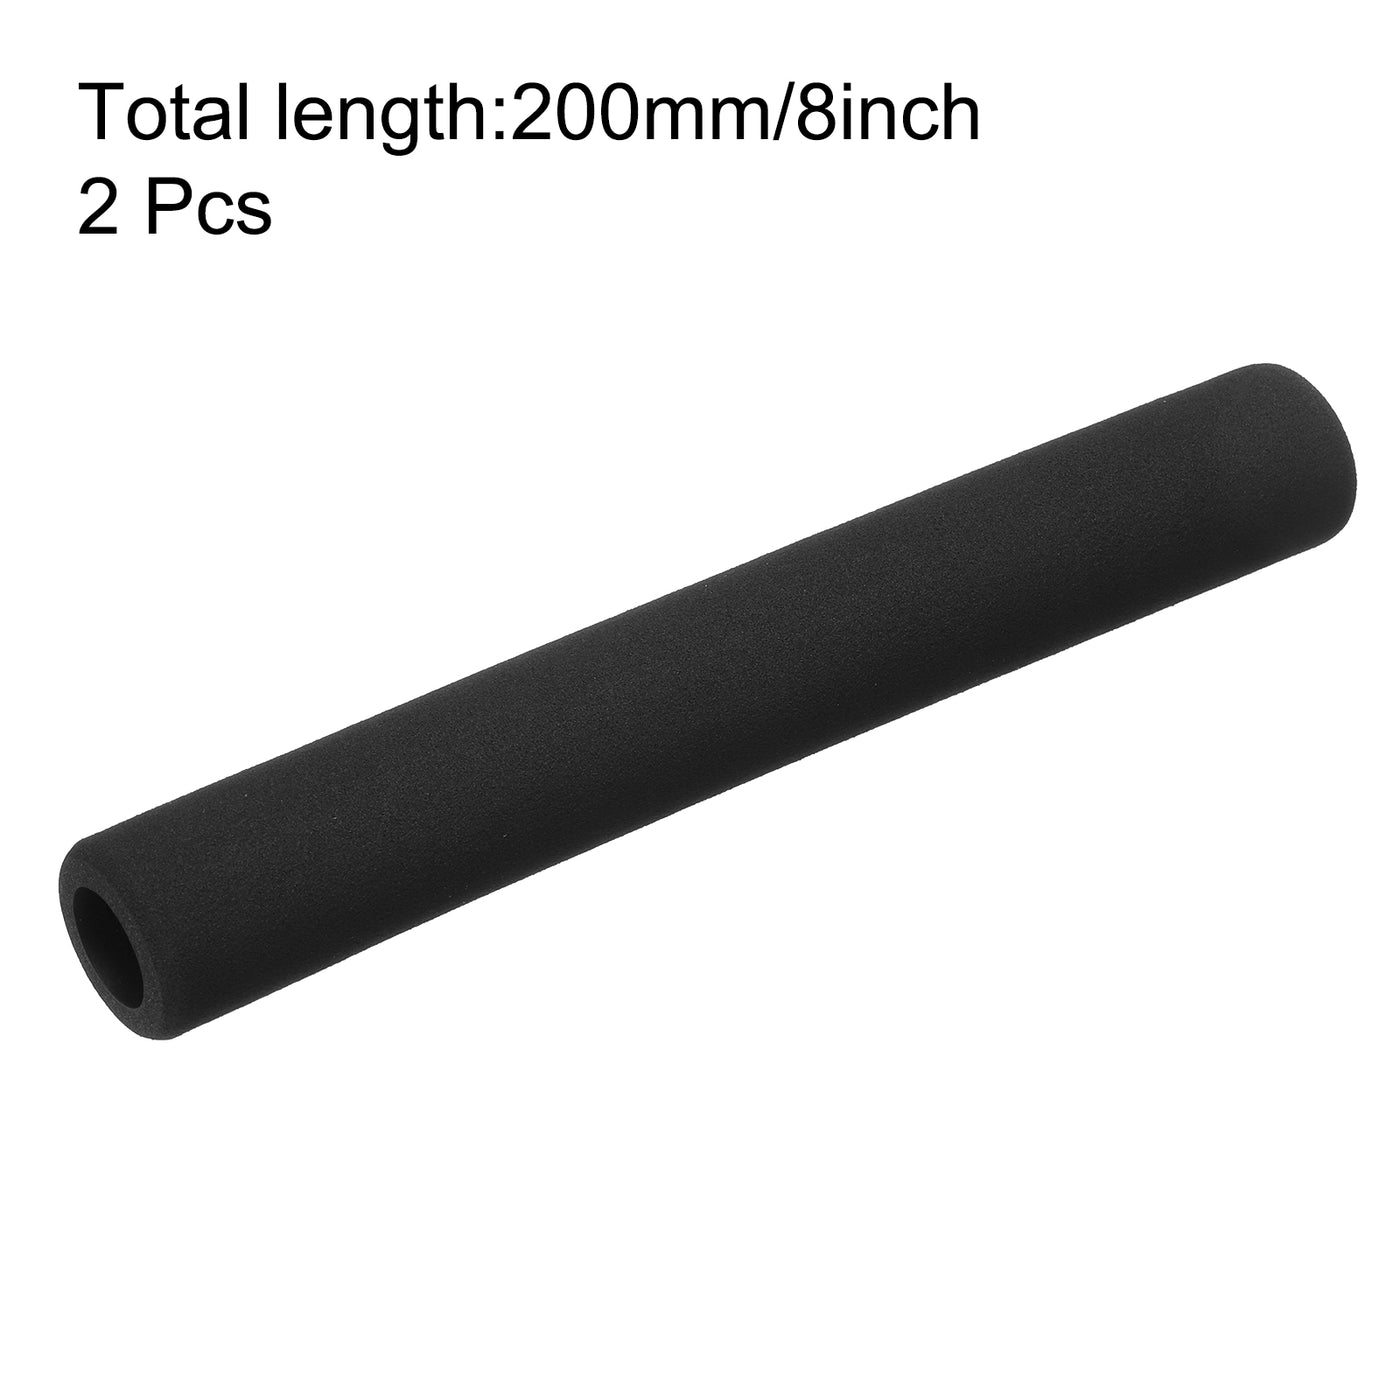 uxcell Uxcell Pipe Insulation Tube Foam Tubing for Handle Grip Support 18mm ID 28mm OD 200mm Heat Preservation Black 2pcs